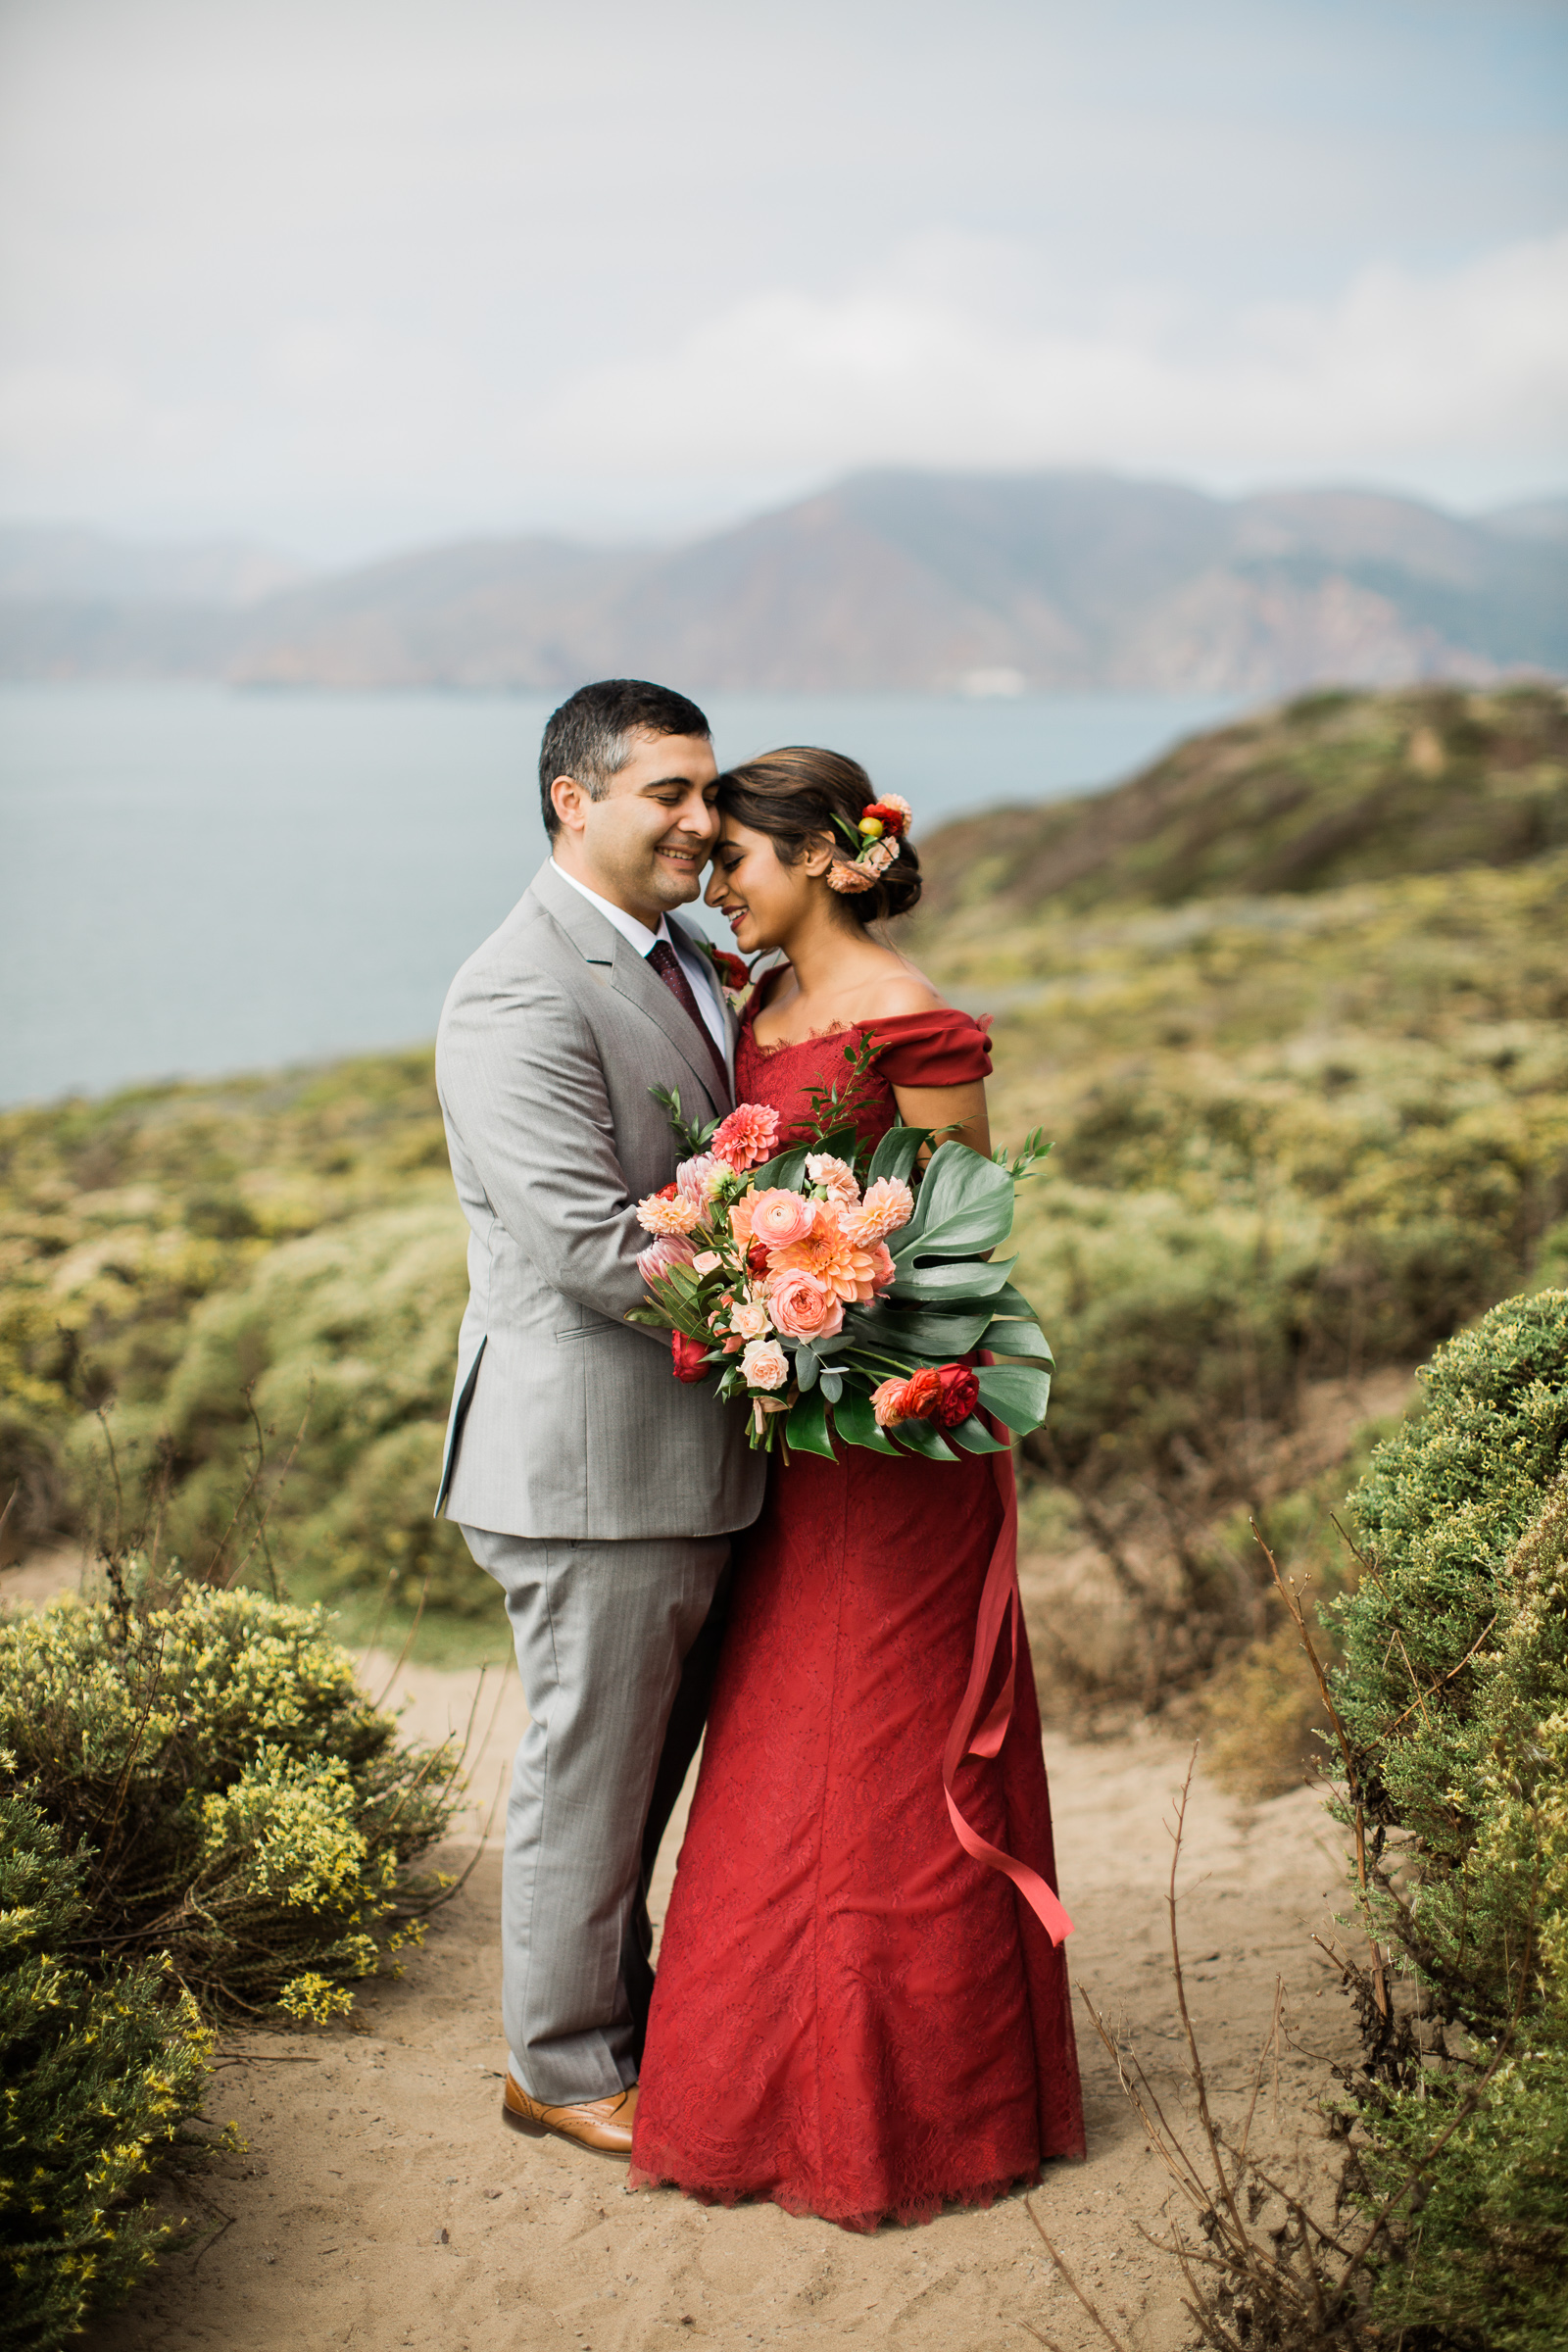 A man in a grey suit and woman in a red wedding gown embrace while standing on a hilltop overlooking the ocean in a Manali Anne photo